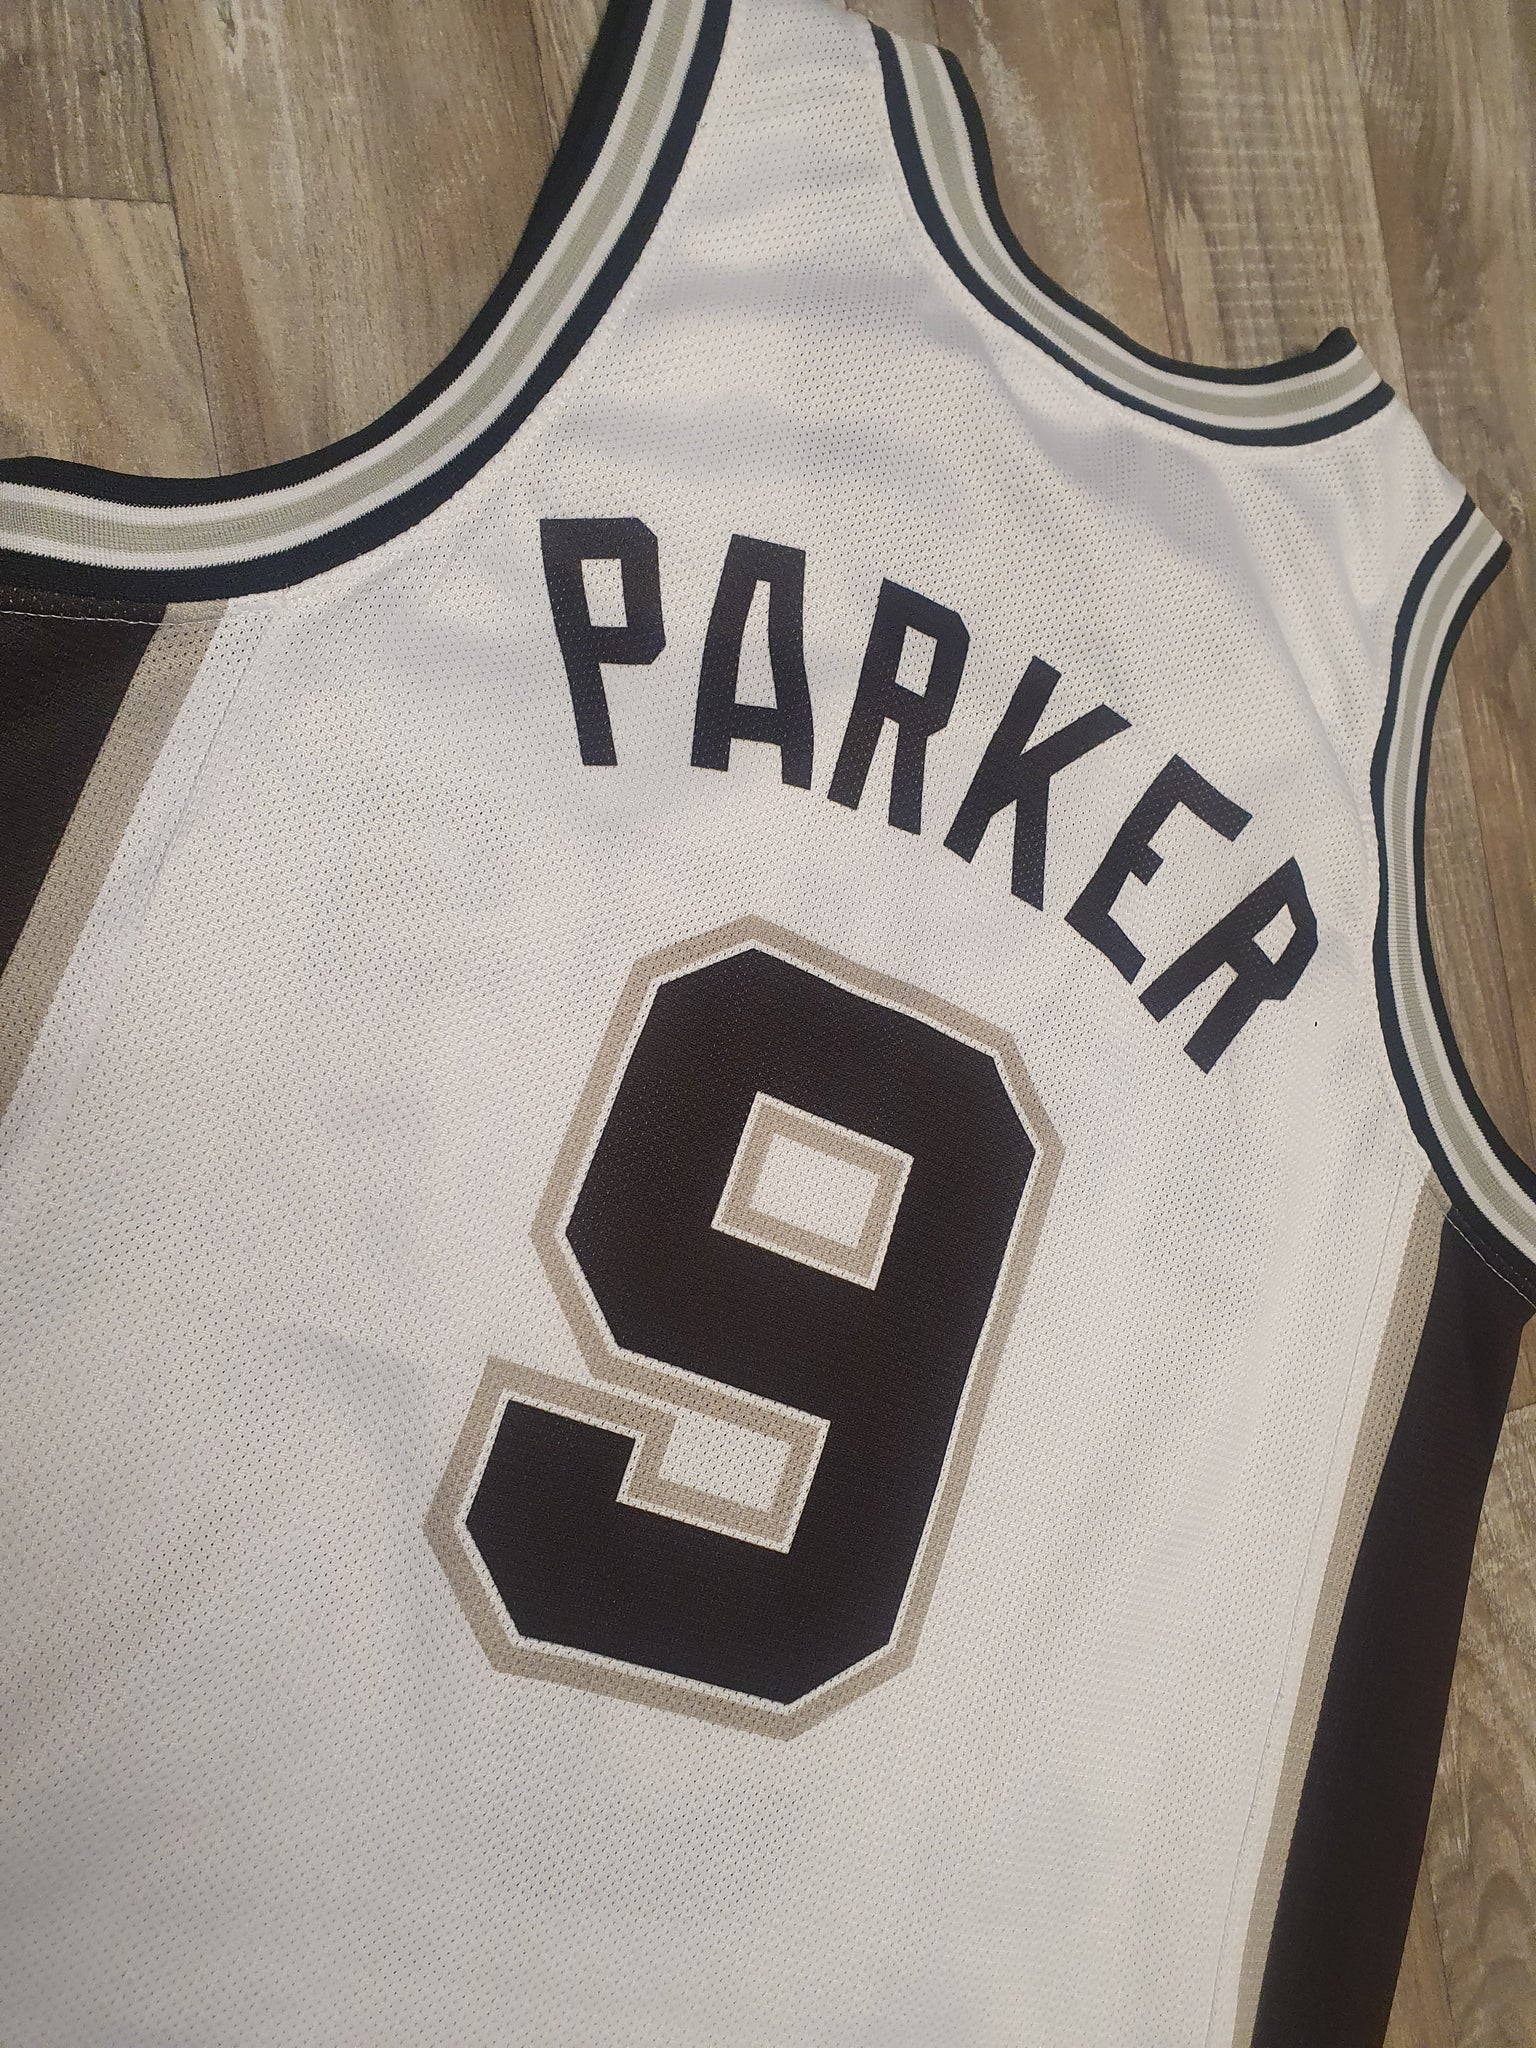 Shop San Antonio Spurs Jersey with great discounts and prices